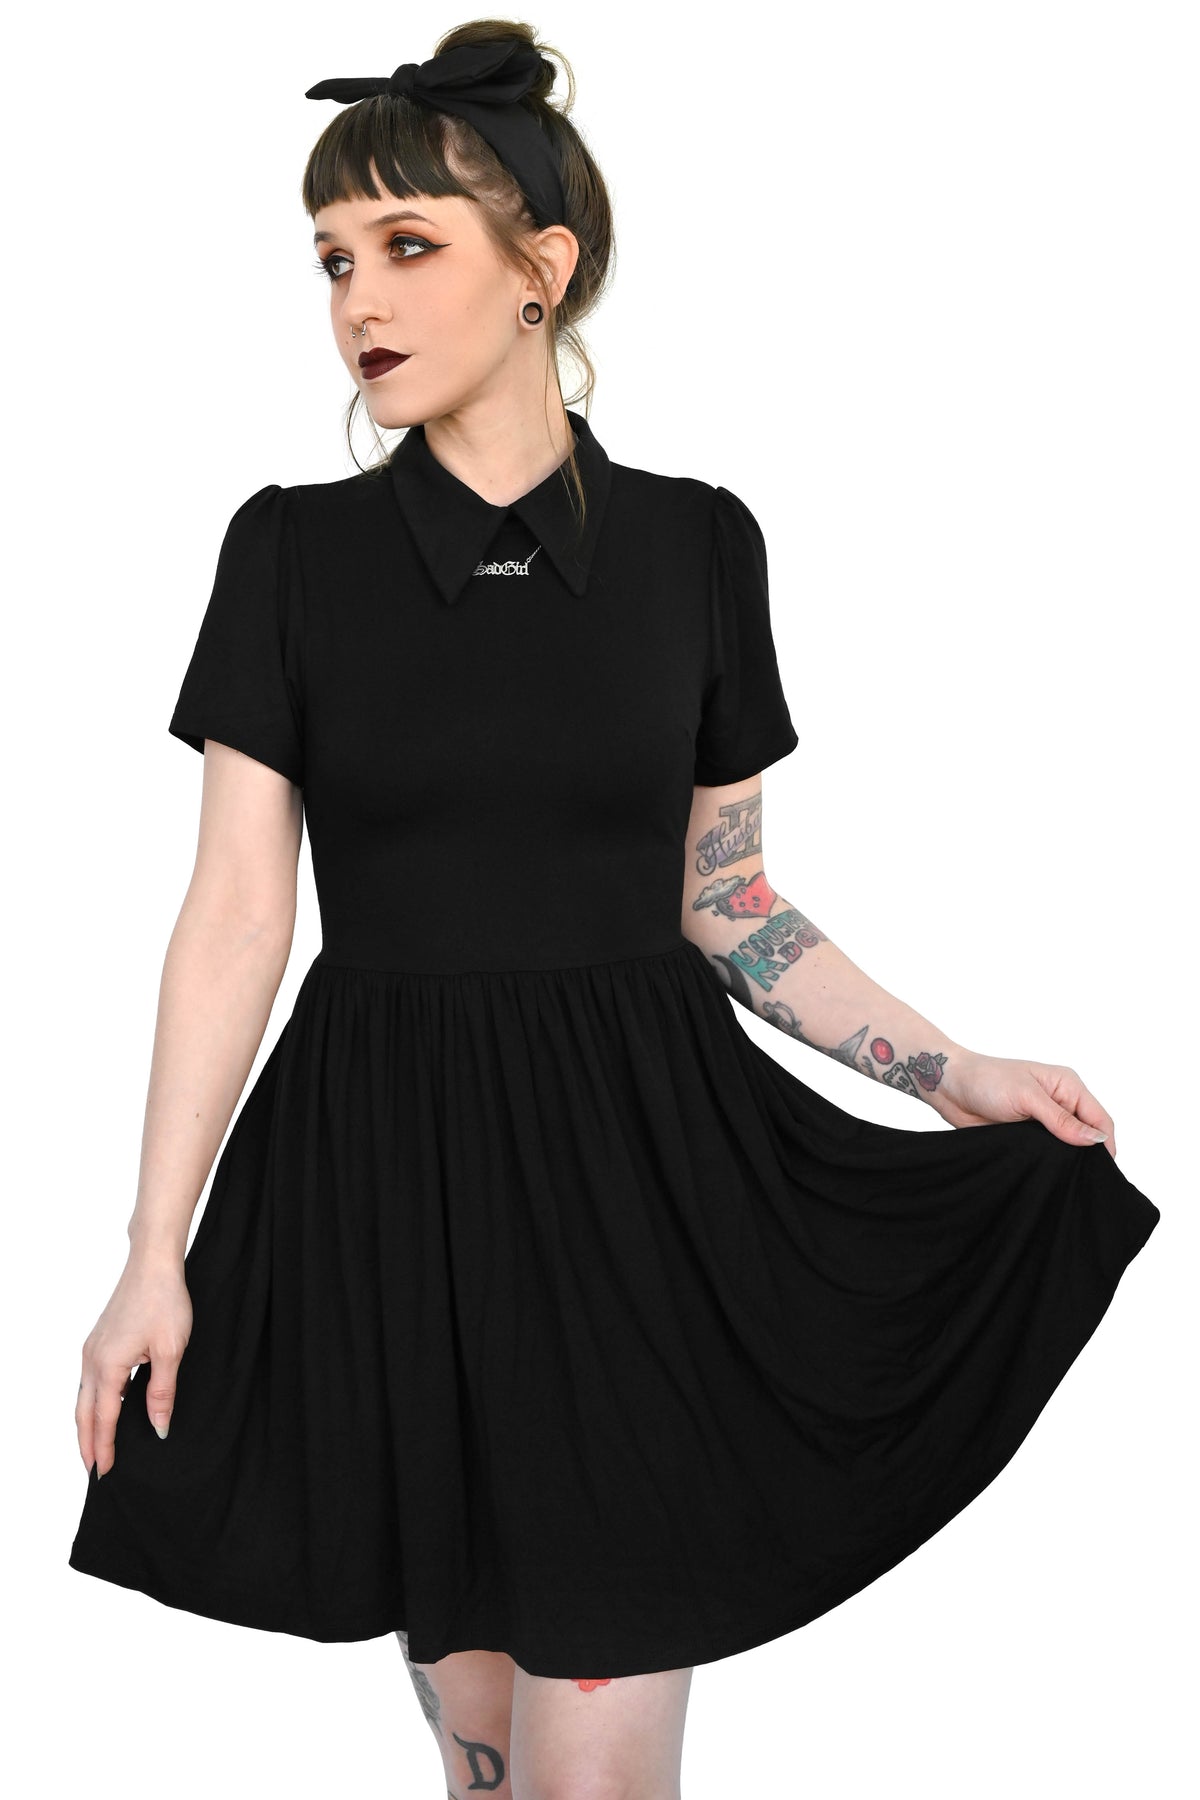 Black collared swing dress with pockets and tie back